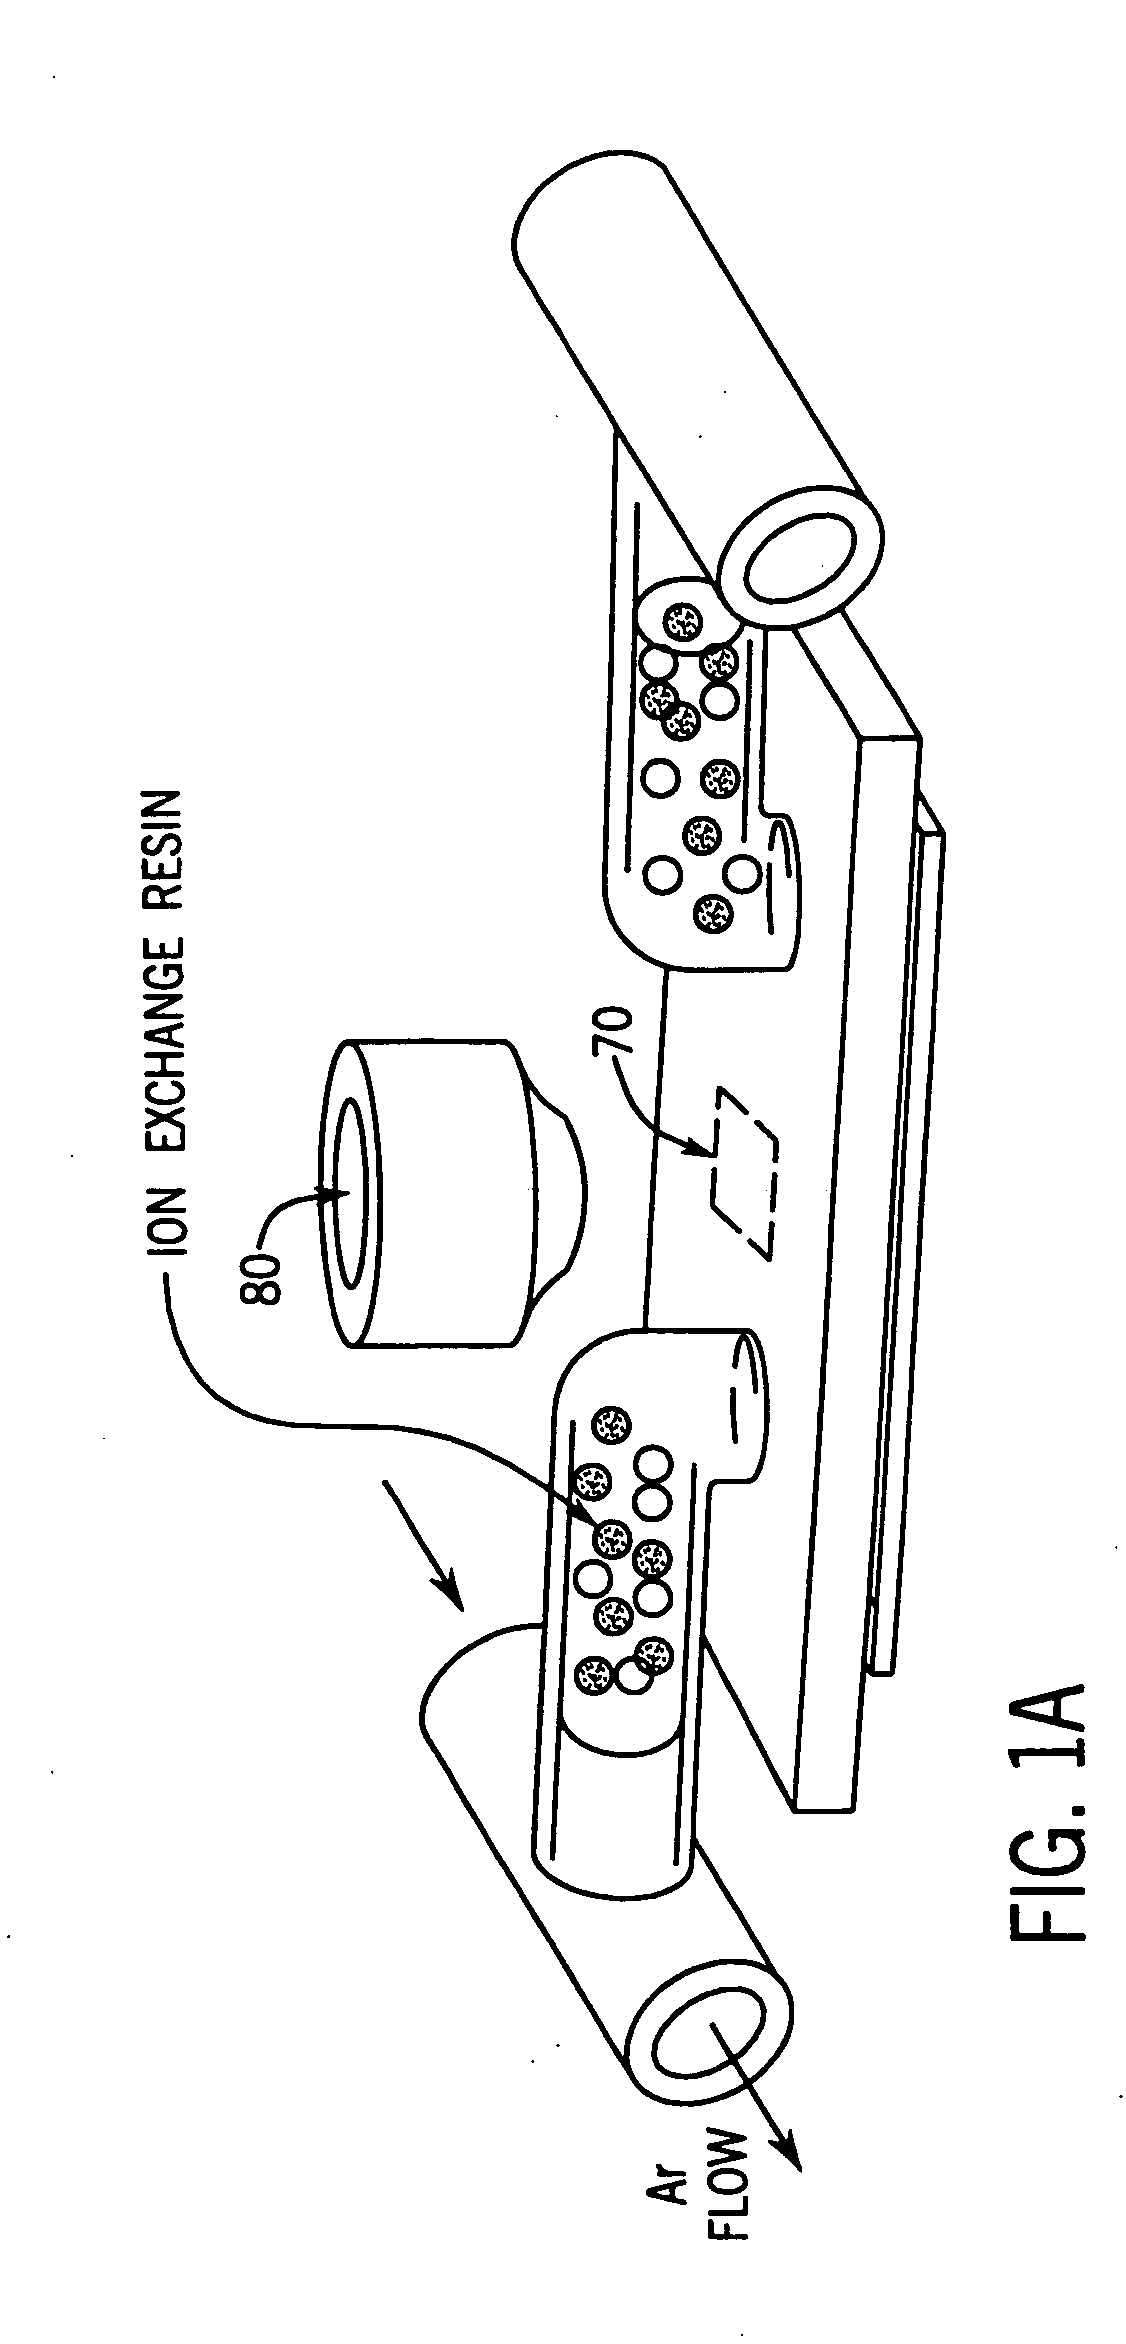 Apparatus and process for the lateral deflection and separation of flowing particles by a static array of optical tweezers